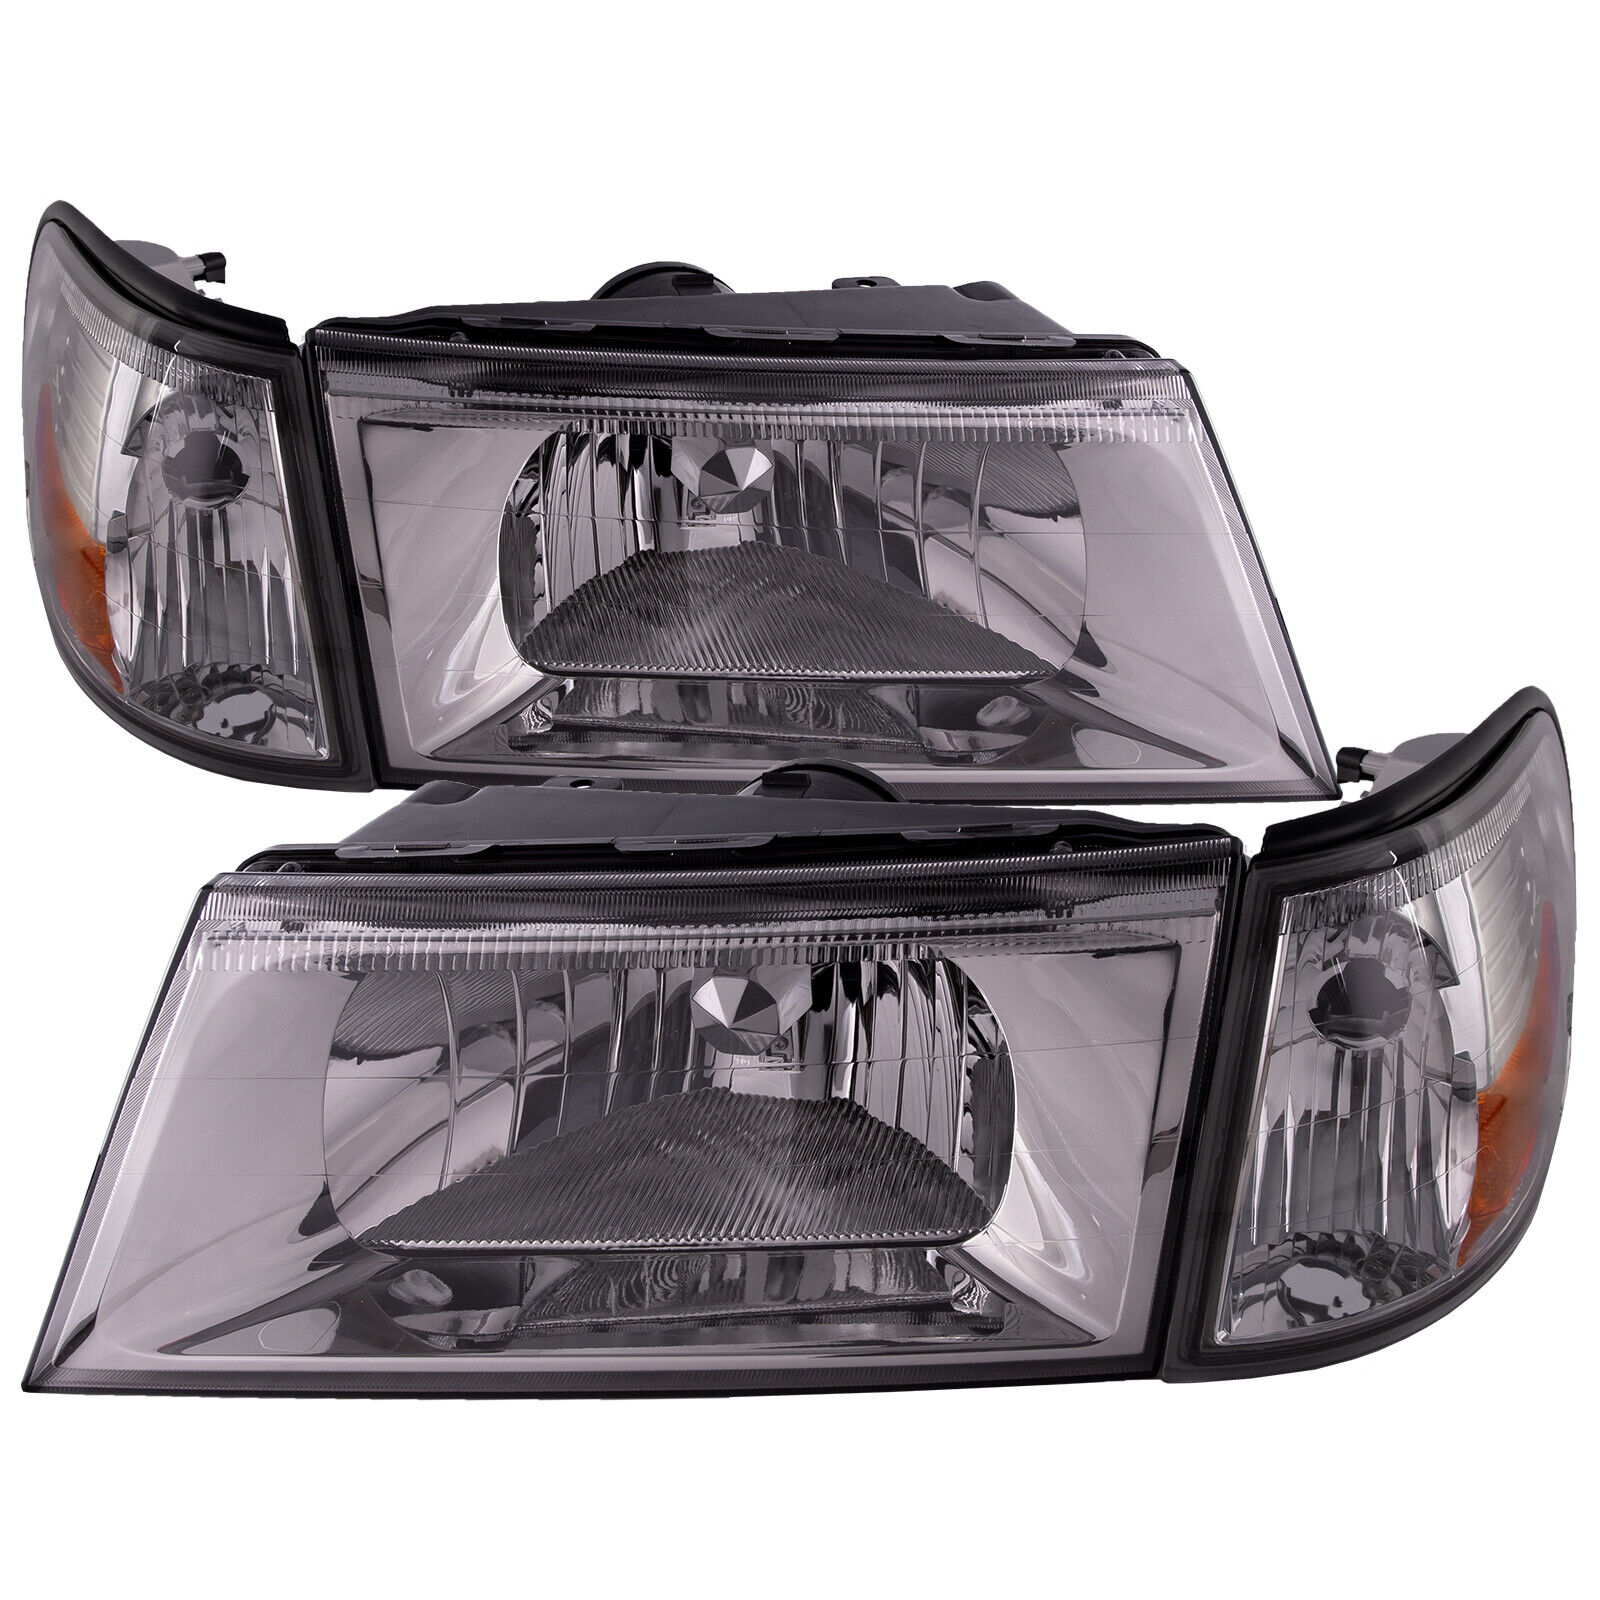 Headlights And Side Marker (4Pc Set) w/Performance Lens For 03-04 Grand Marquis